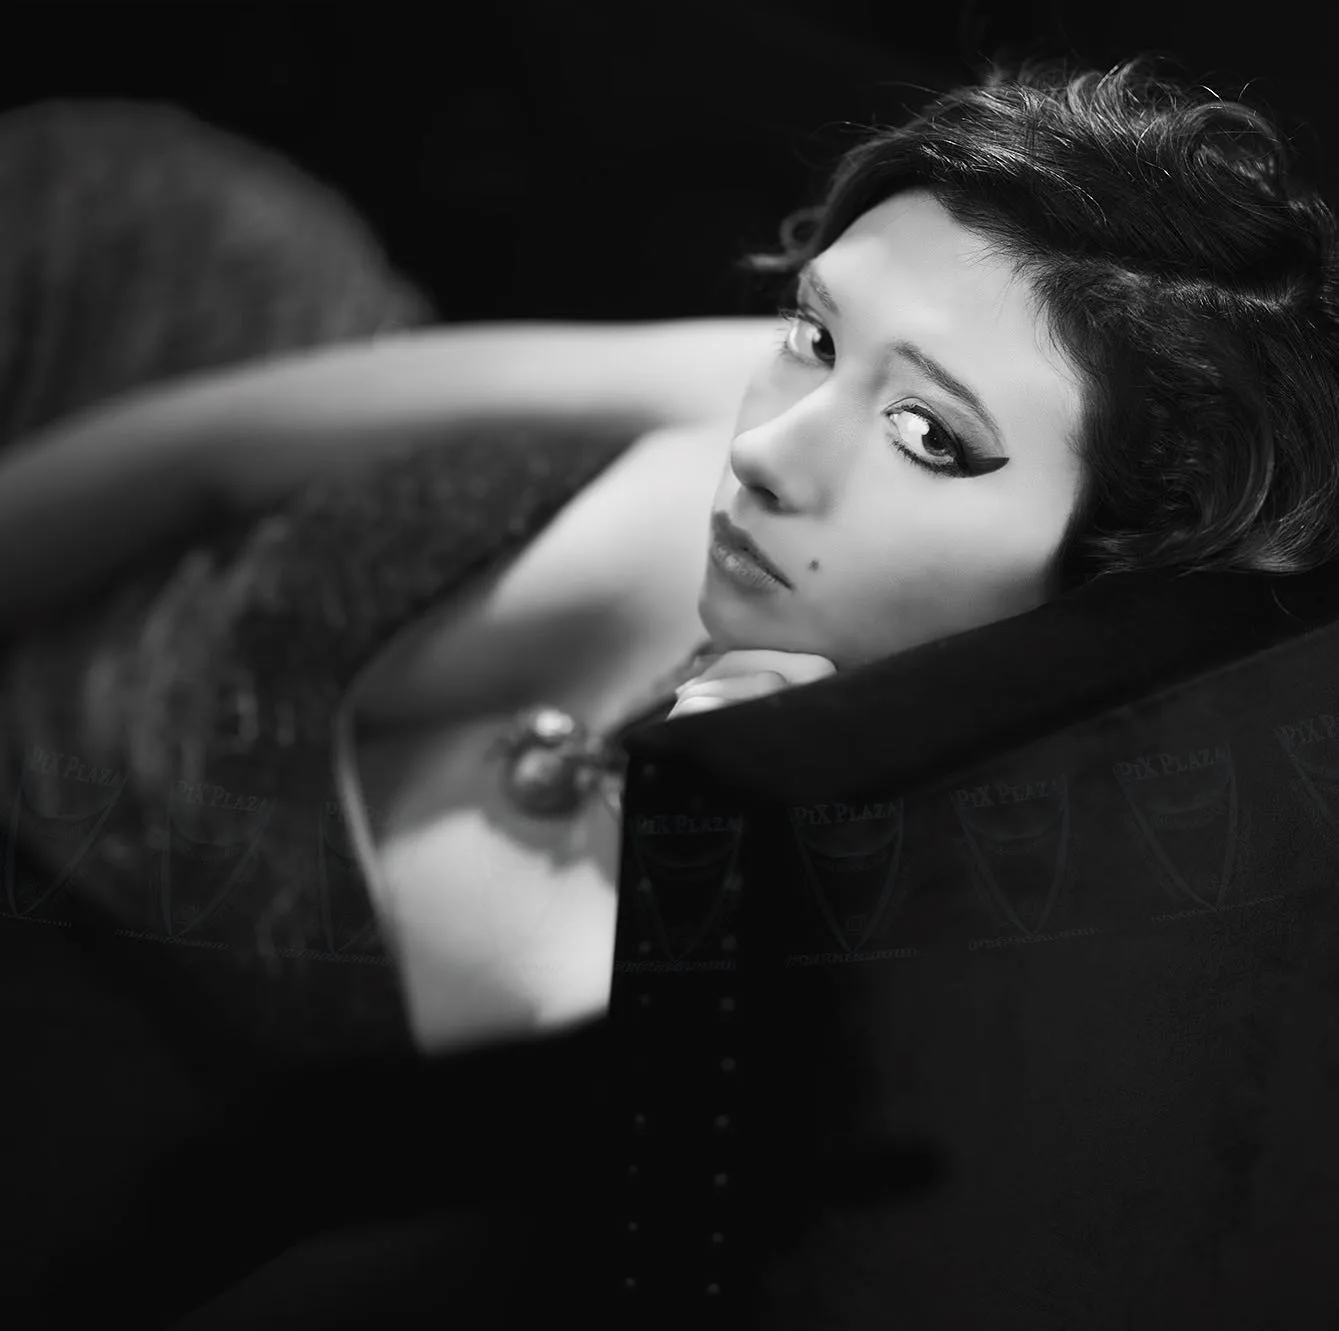 Model lying down on sofa and looking at camera. Black and white image.